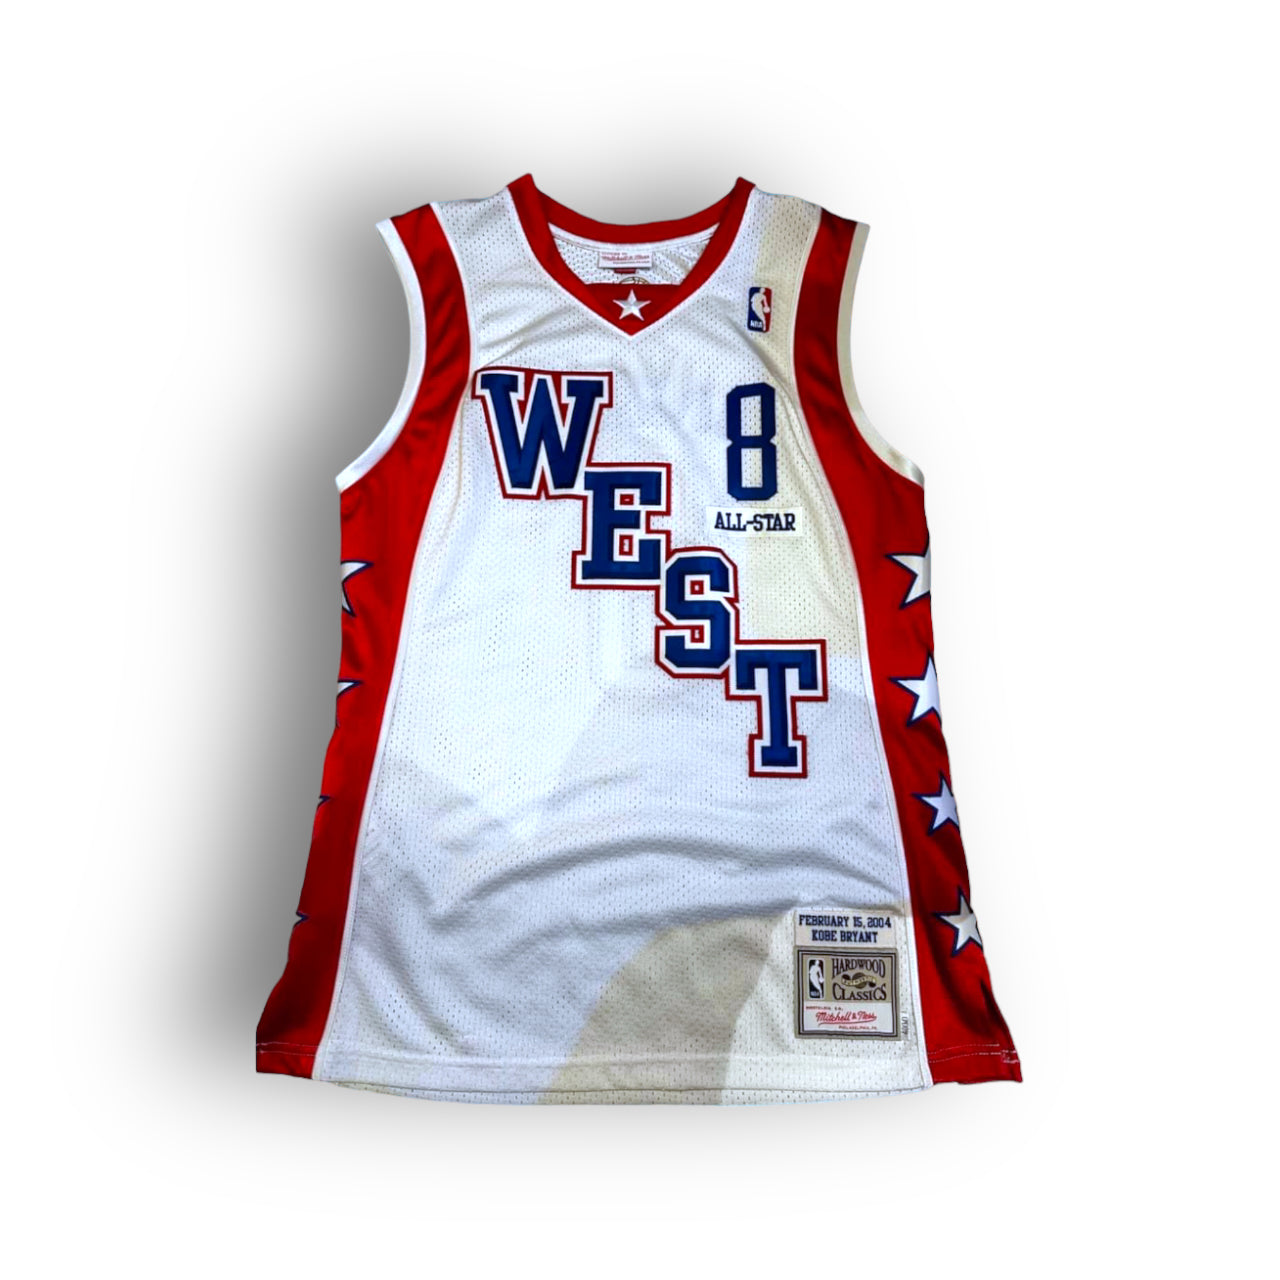 Mitchell and Ness Kobe Bryant Los Angeles Lakers 2004 NBA All-Star Game Western Team Authentic Jersey - White/Red/Blue #8 - Hoop Jersey Store